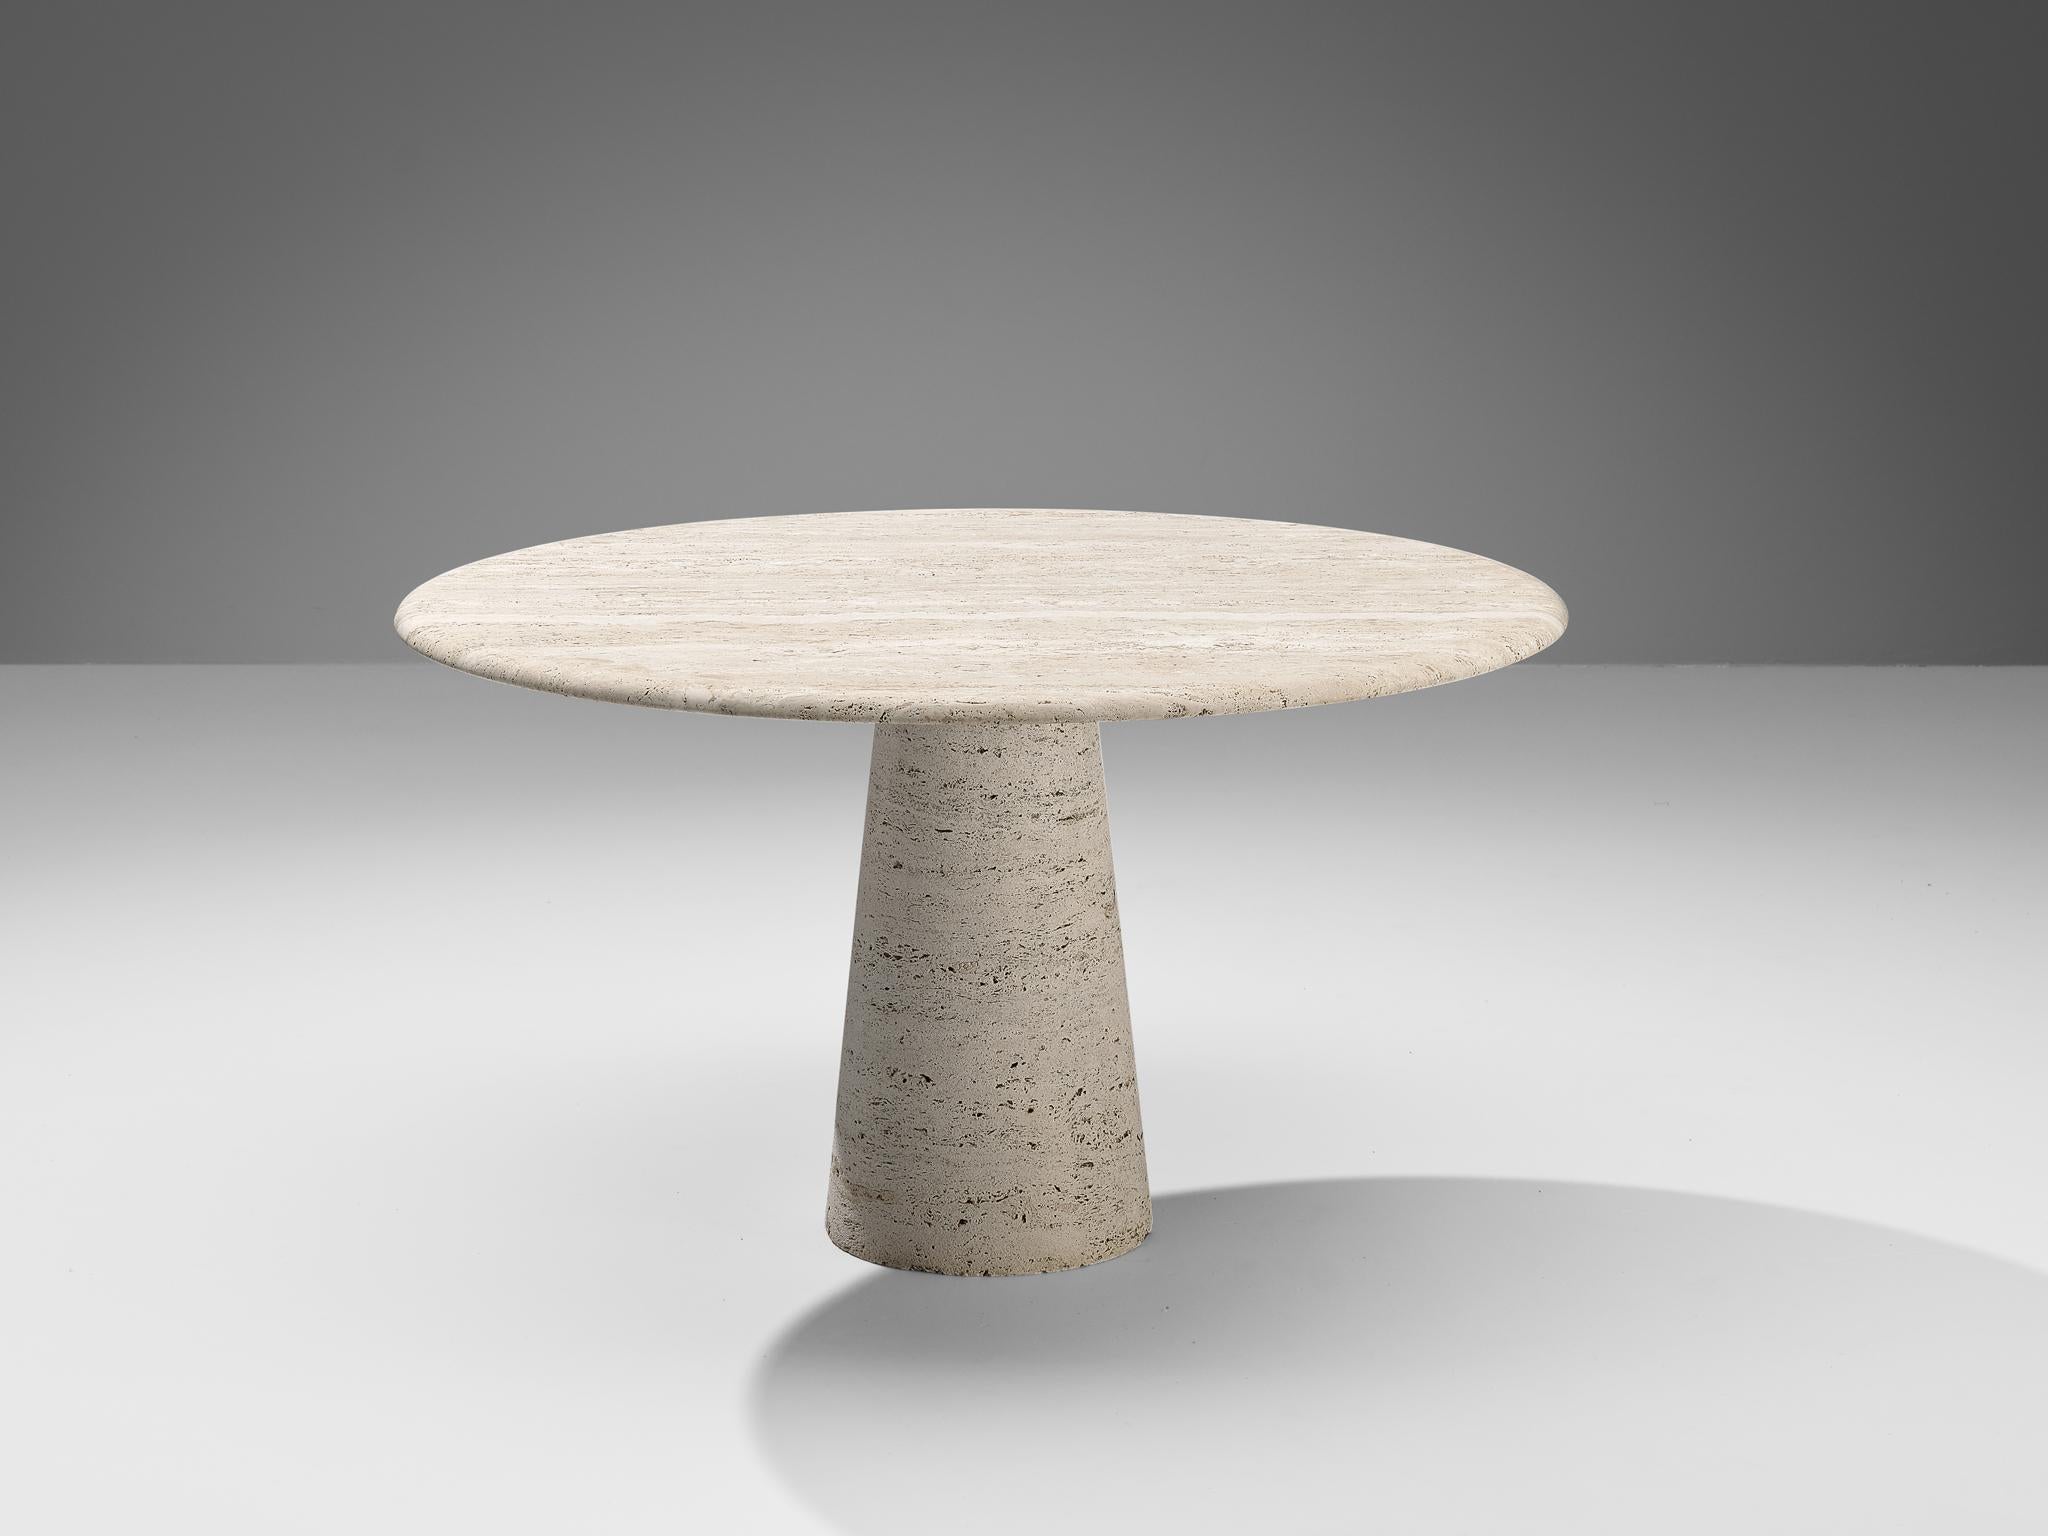 Dining table, travertine, Italy, 1970s.

This round table is a skilful example of postmodern design and a great classic for versatile use. A minimalistic table top is held by a sturdy, cone-shaped pedestal, both crafted from travertine. The design